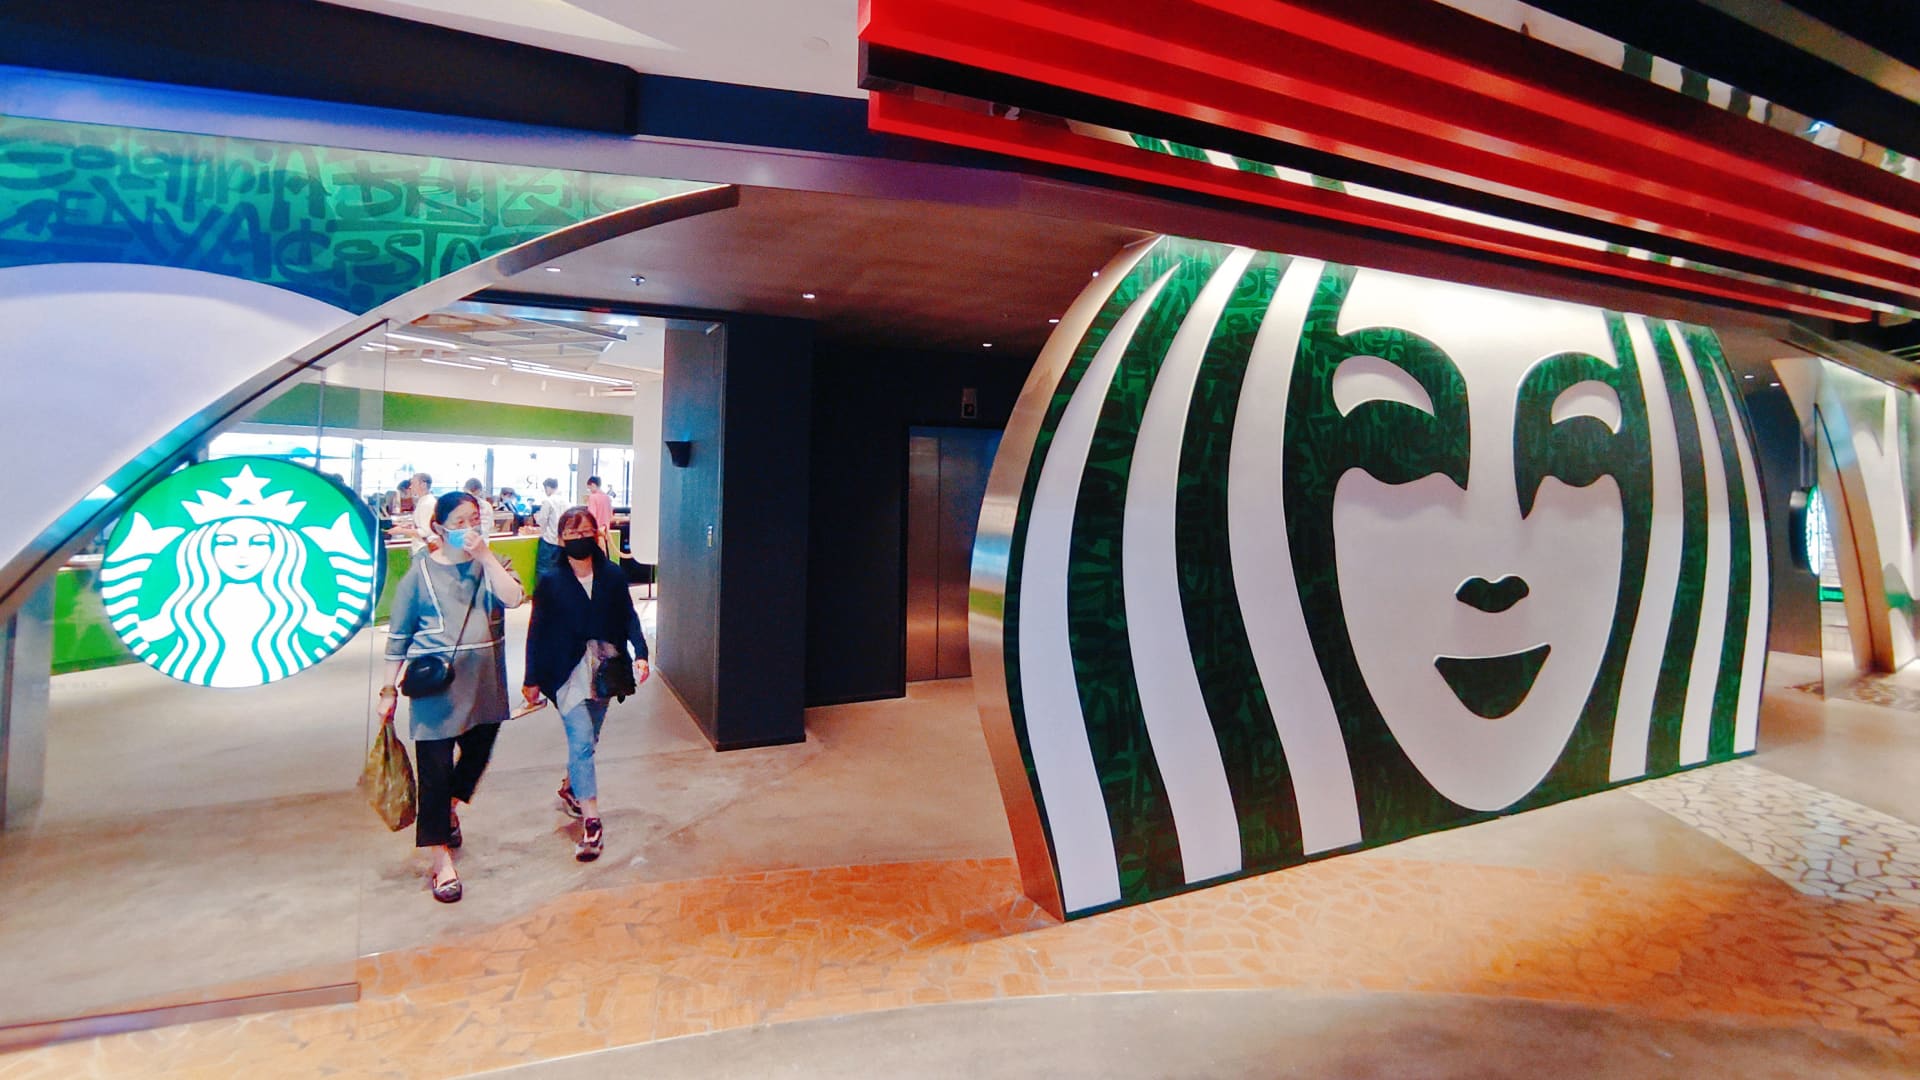 Starbucks earnings beat expectations as consumers spend more in its U.S. stores